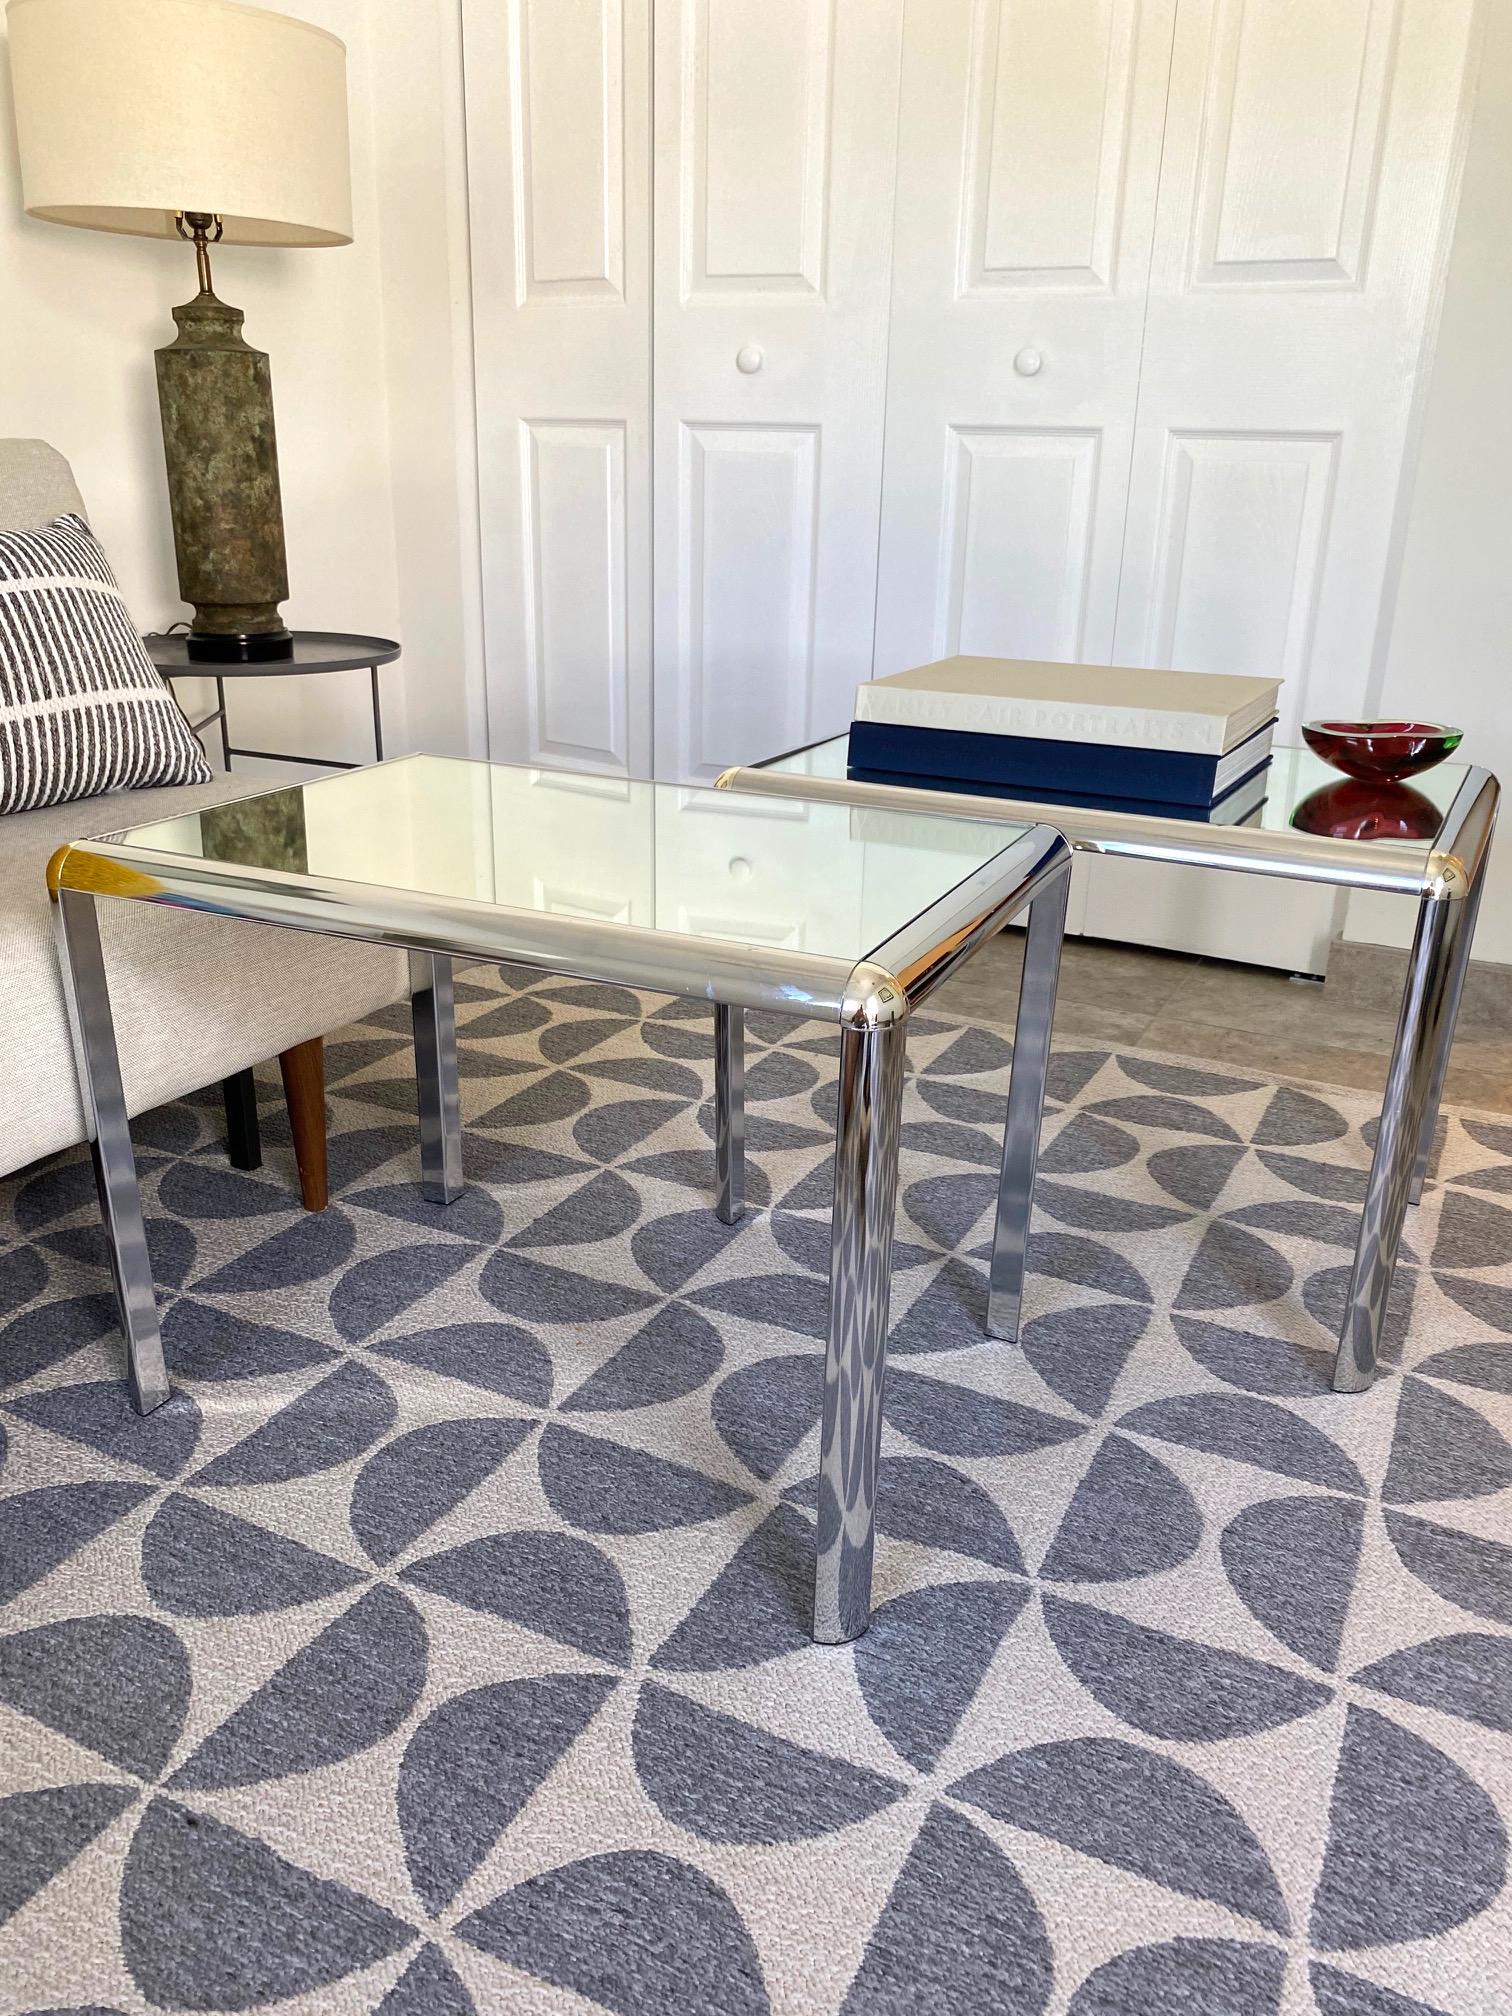 Pair of Mid-Century Modern Chrome Side Tables with Mirrored Tops, c. 1970's For Sale 3